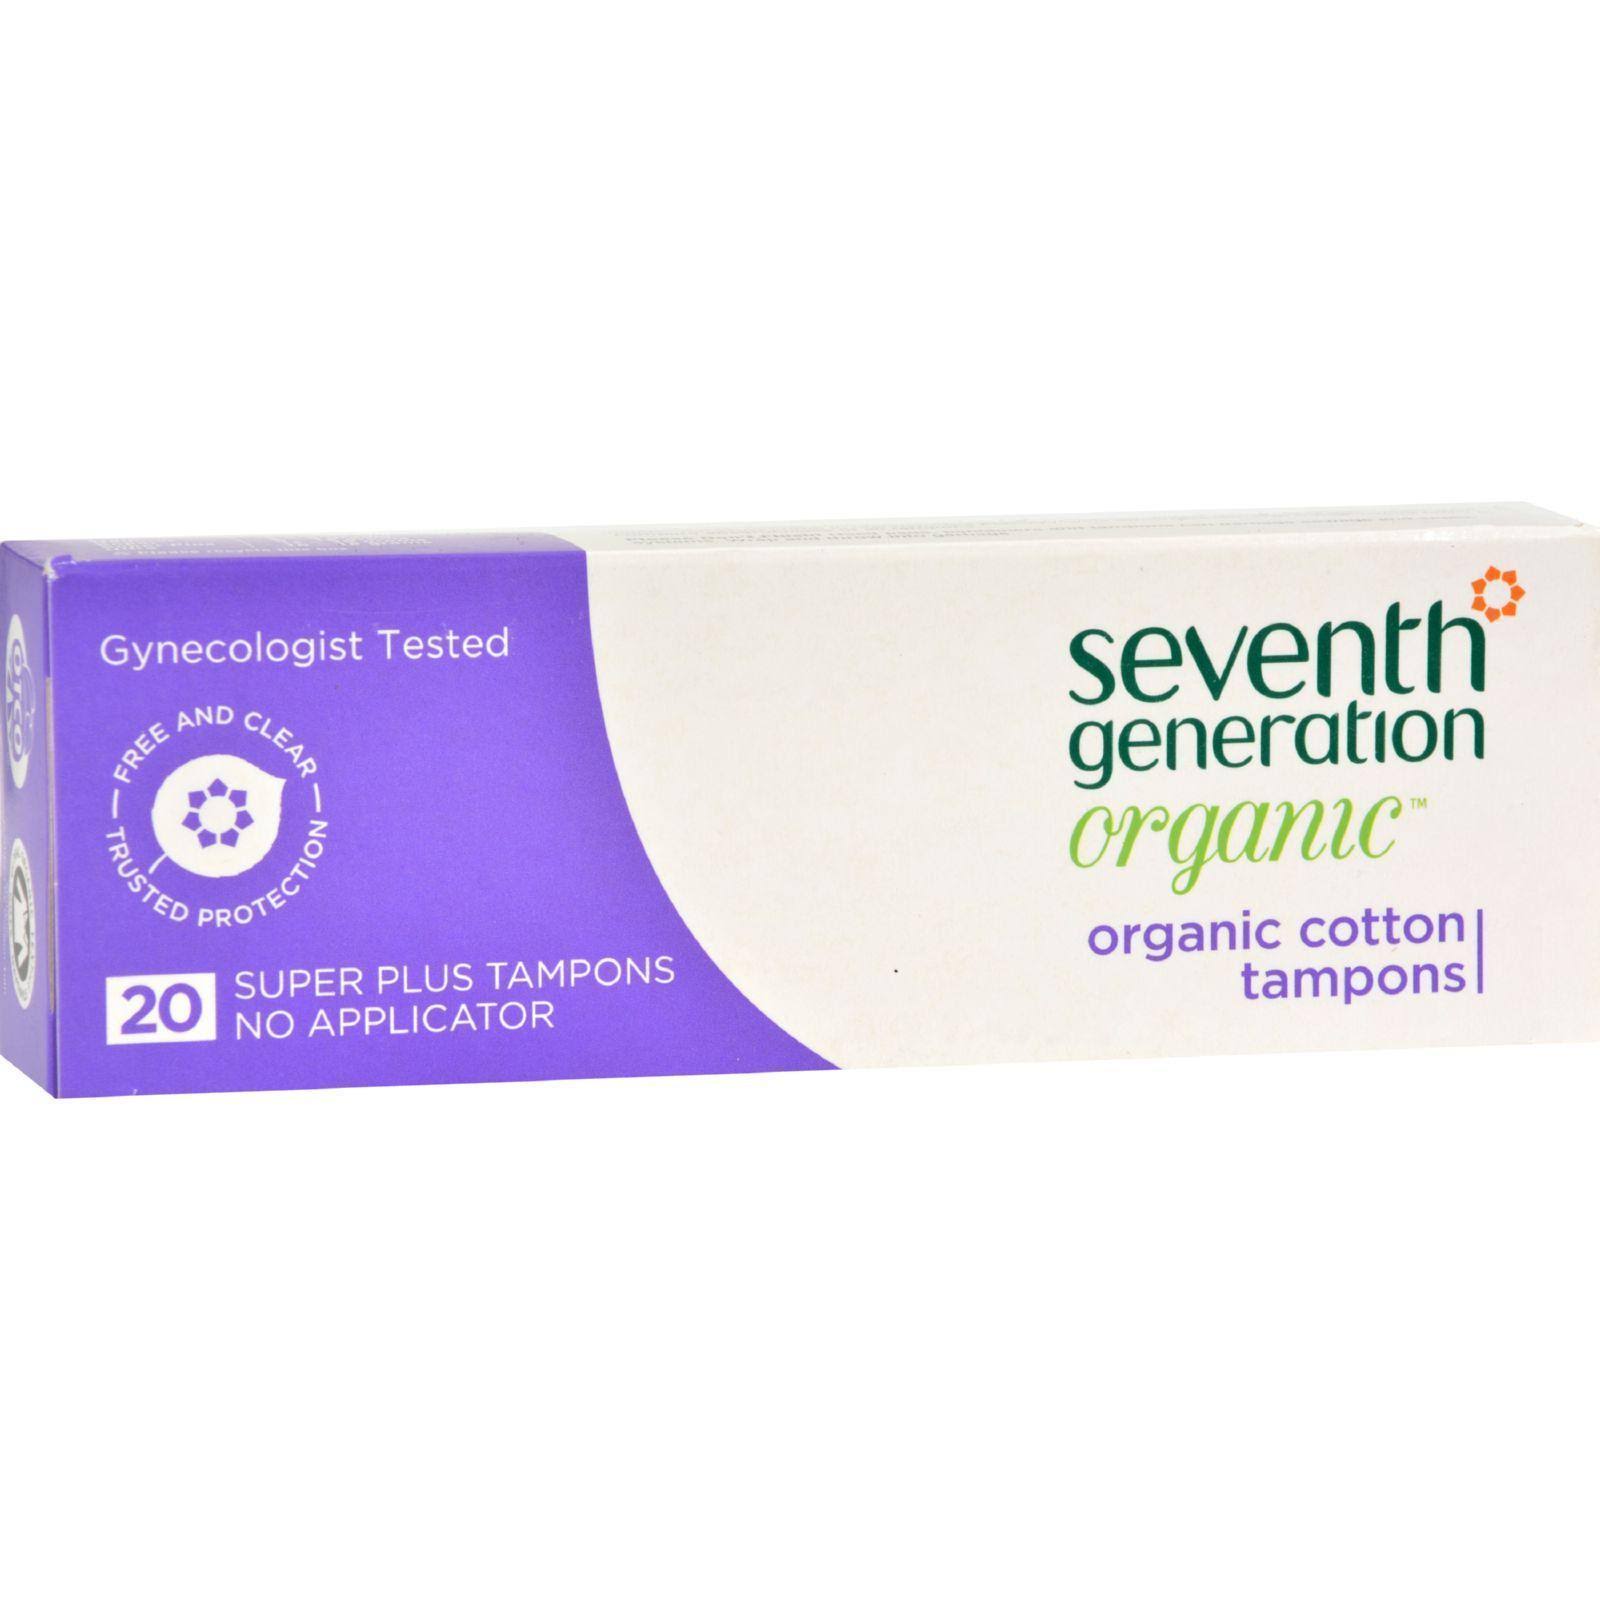 Seventh Generation Organic Cotton Tampons - 20 Pack